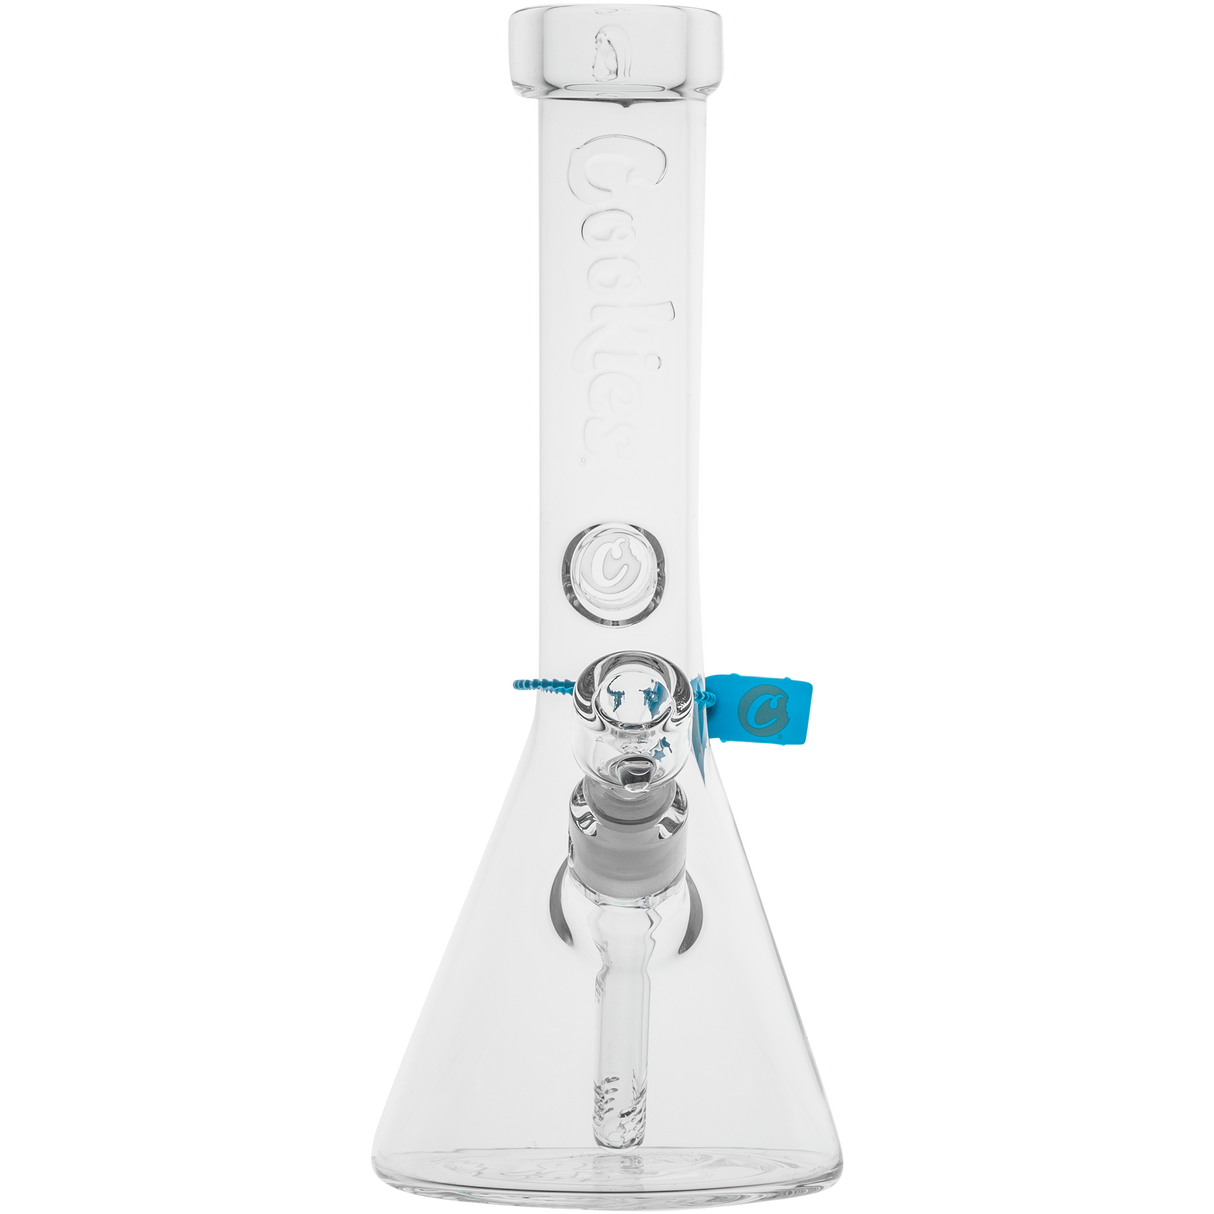 Cookies Flame Beaker Bong made of Borosilicate Glass with Cookies branding, front view on white background